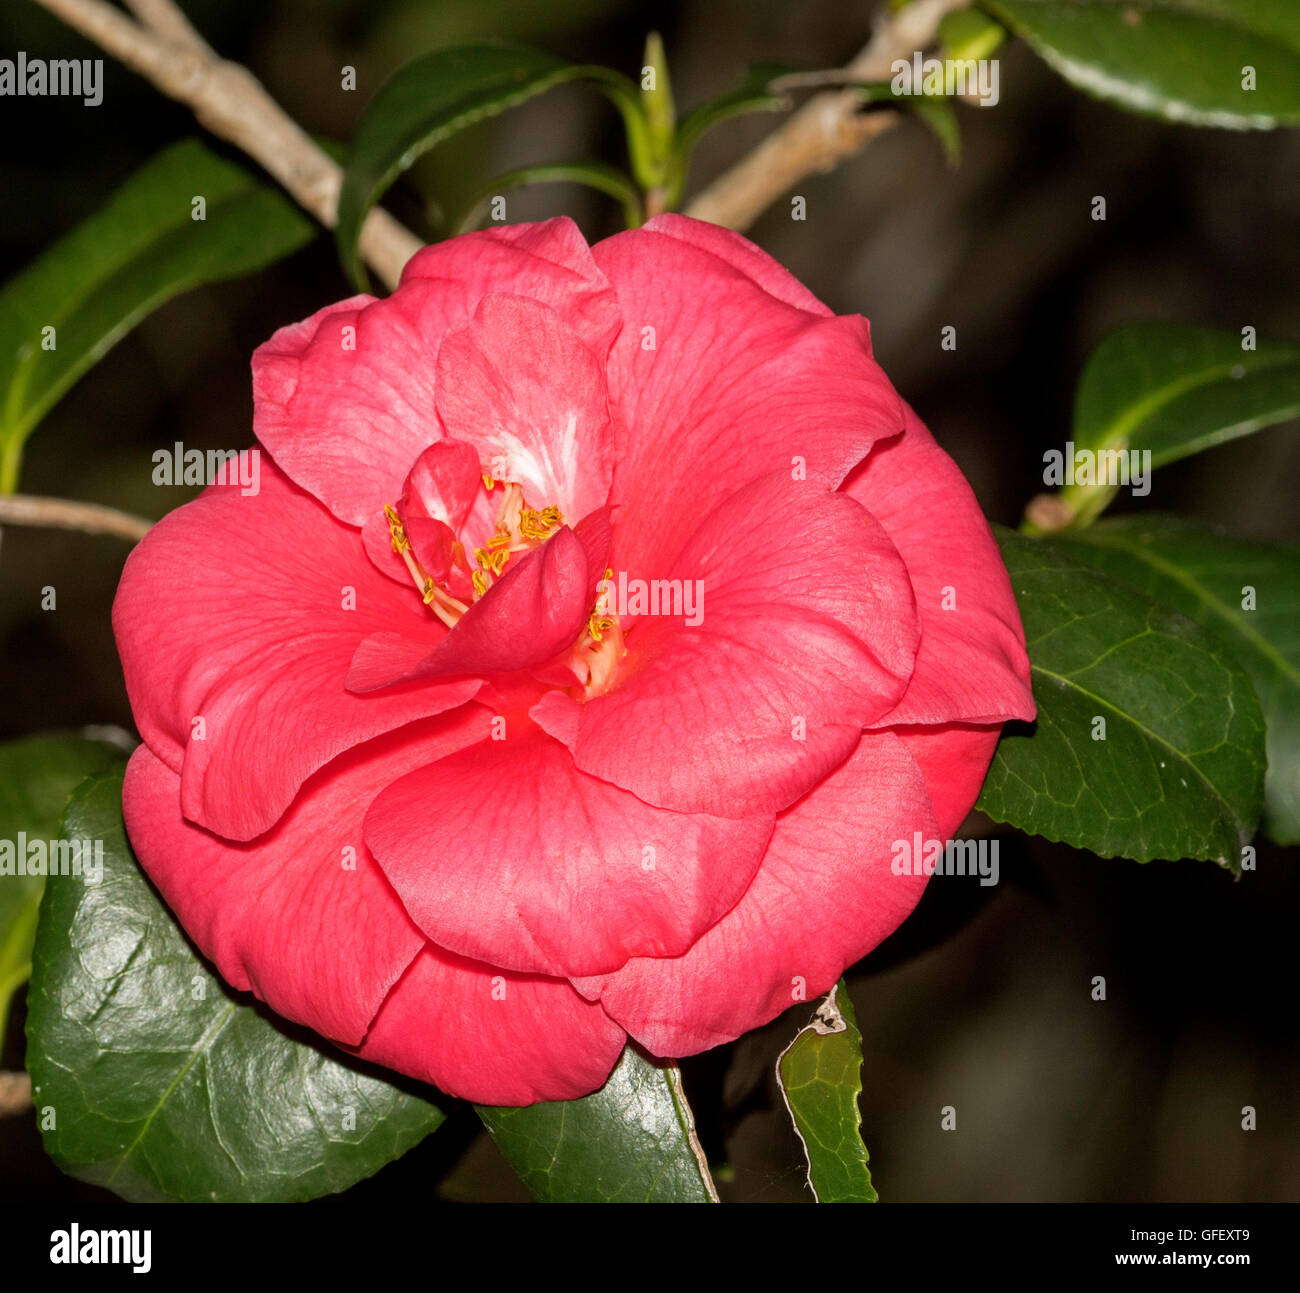 Stunning vivid pink / red double flower and deep green leaves of Camellia sasanqua, evergreen garden shrub grown from seed Stock Photo